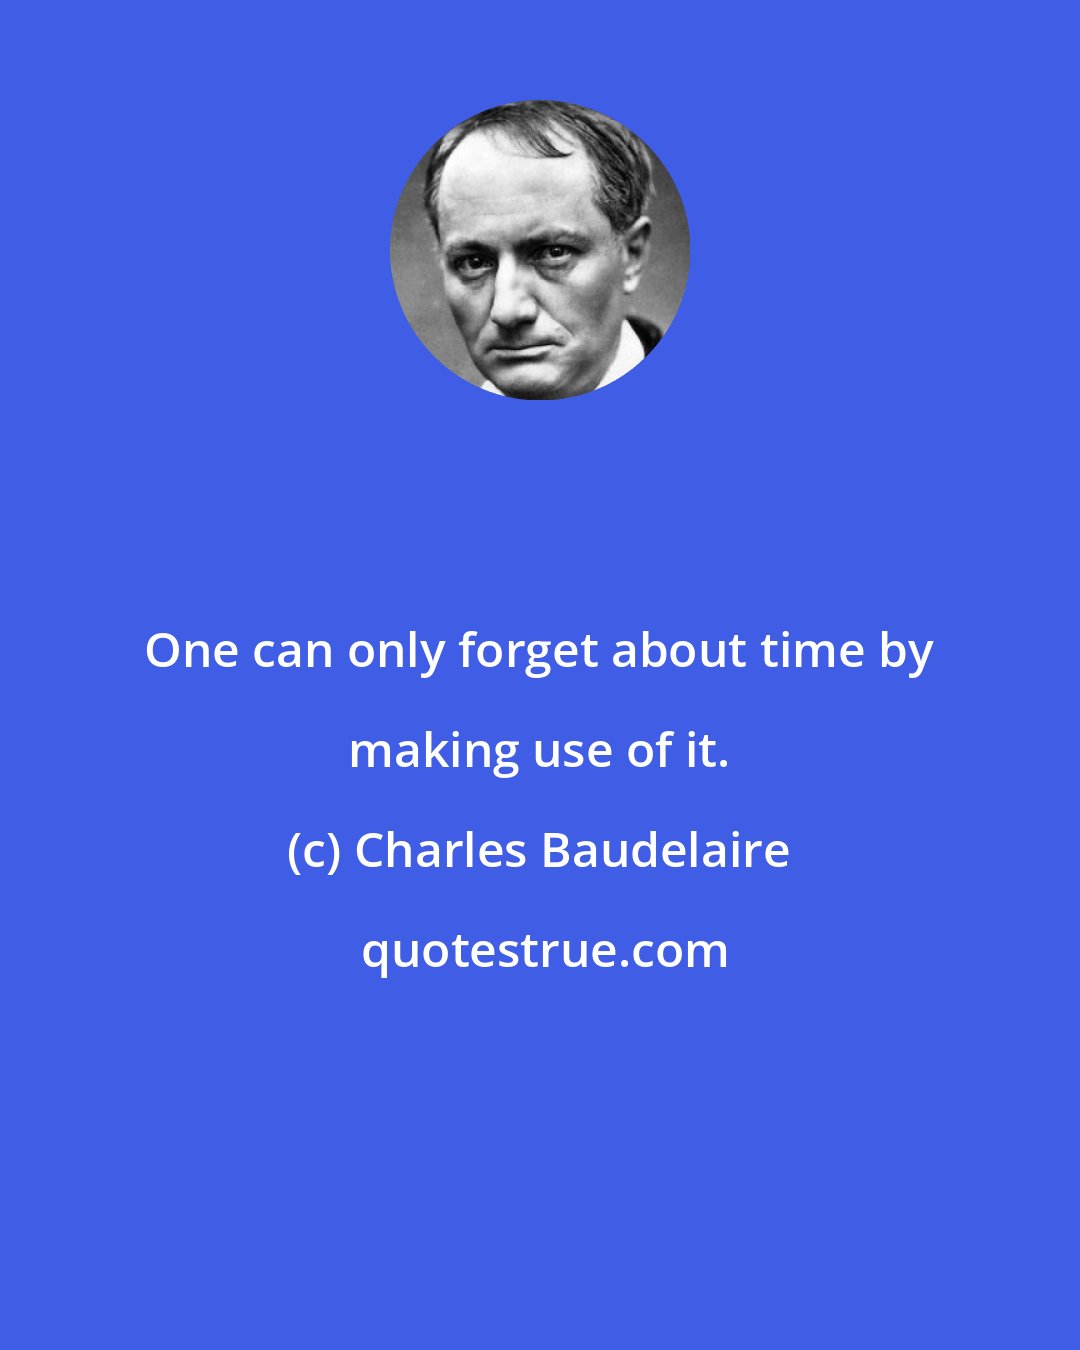 Charles Baudelaire: One can only forget about time by making use of it.